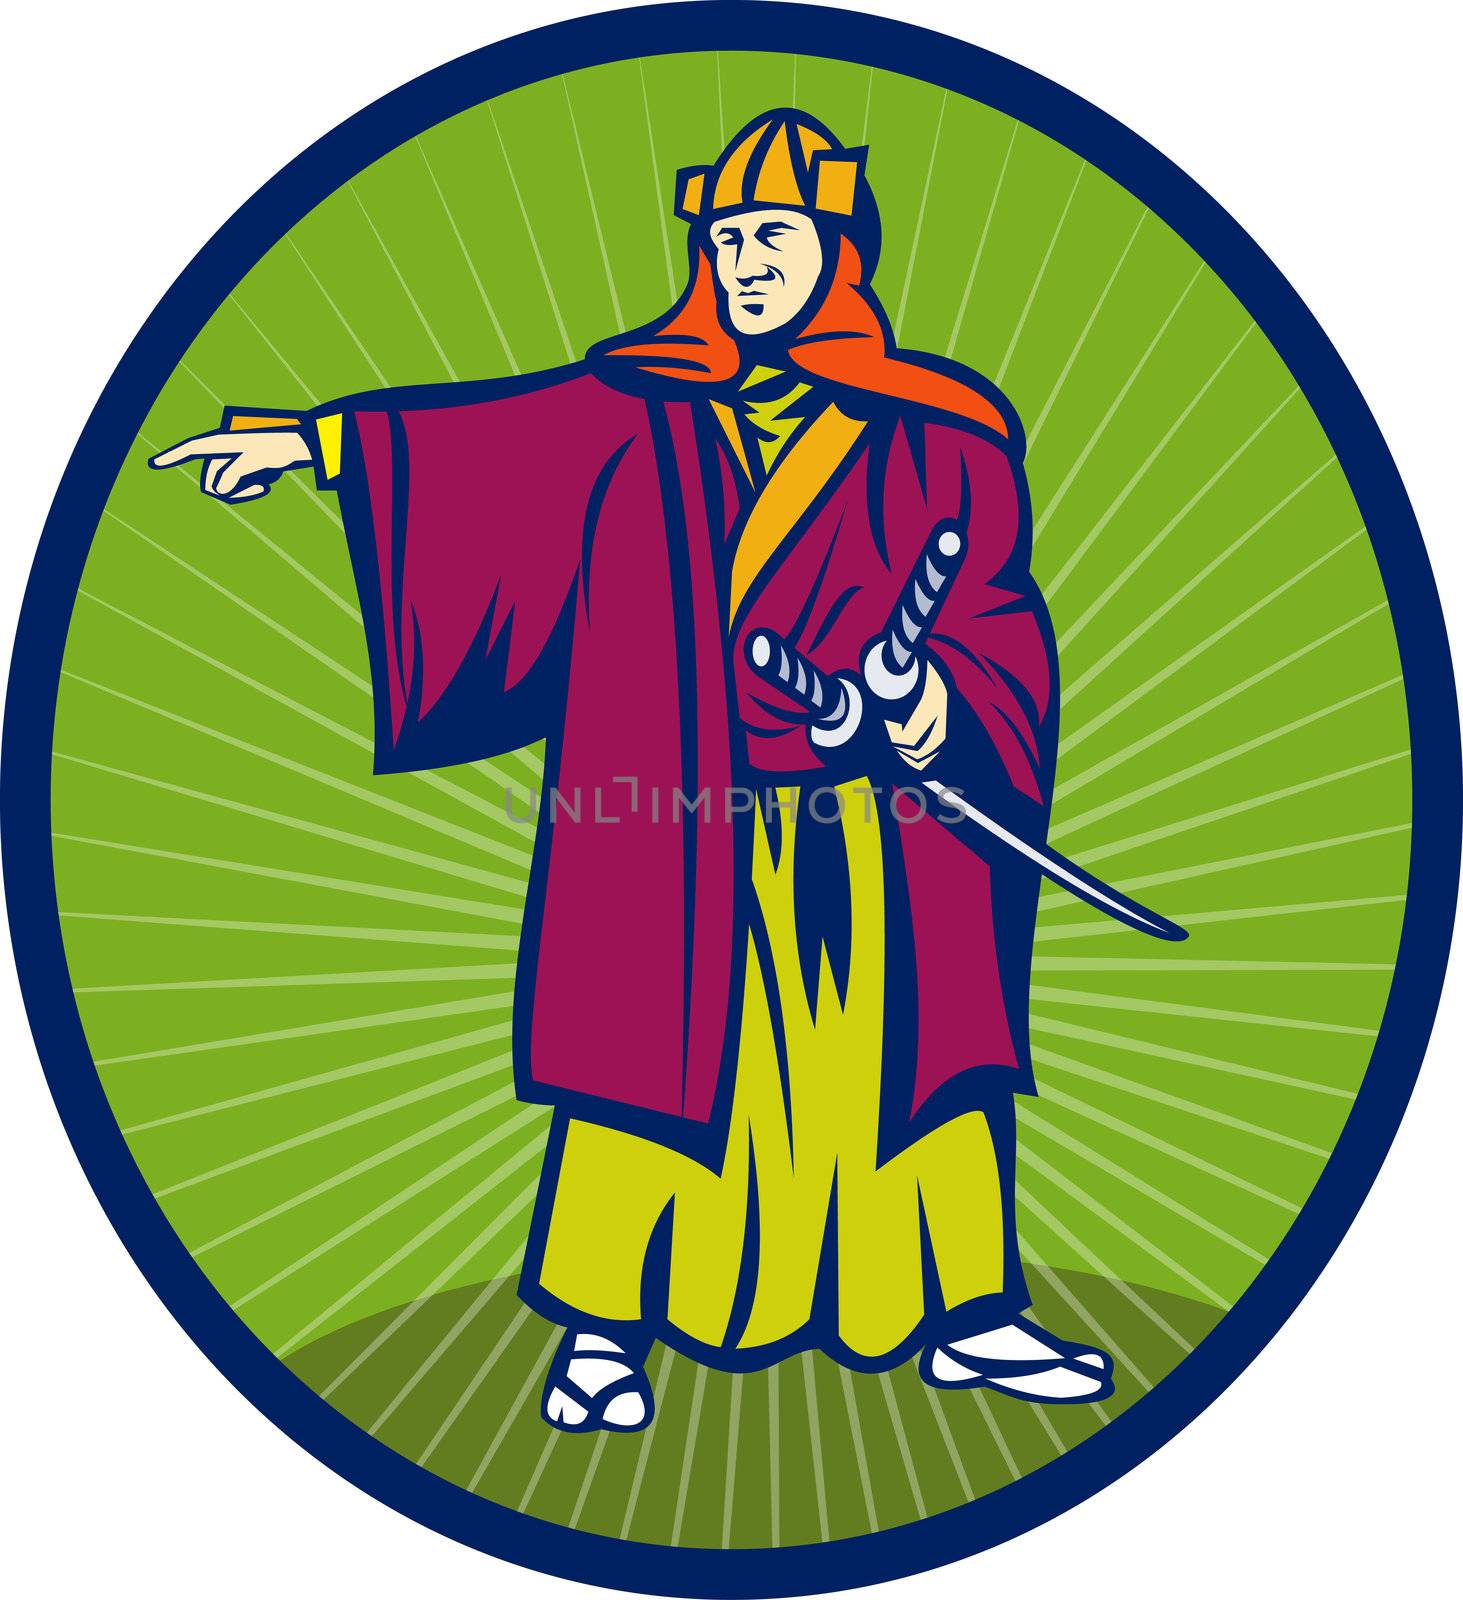 illustration of a Samurai warrior with katana sword pointing to side set inside an oval.